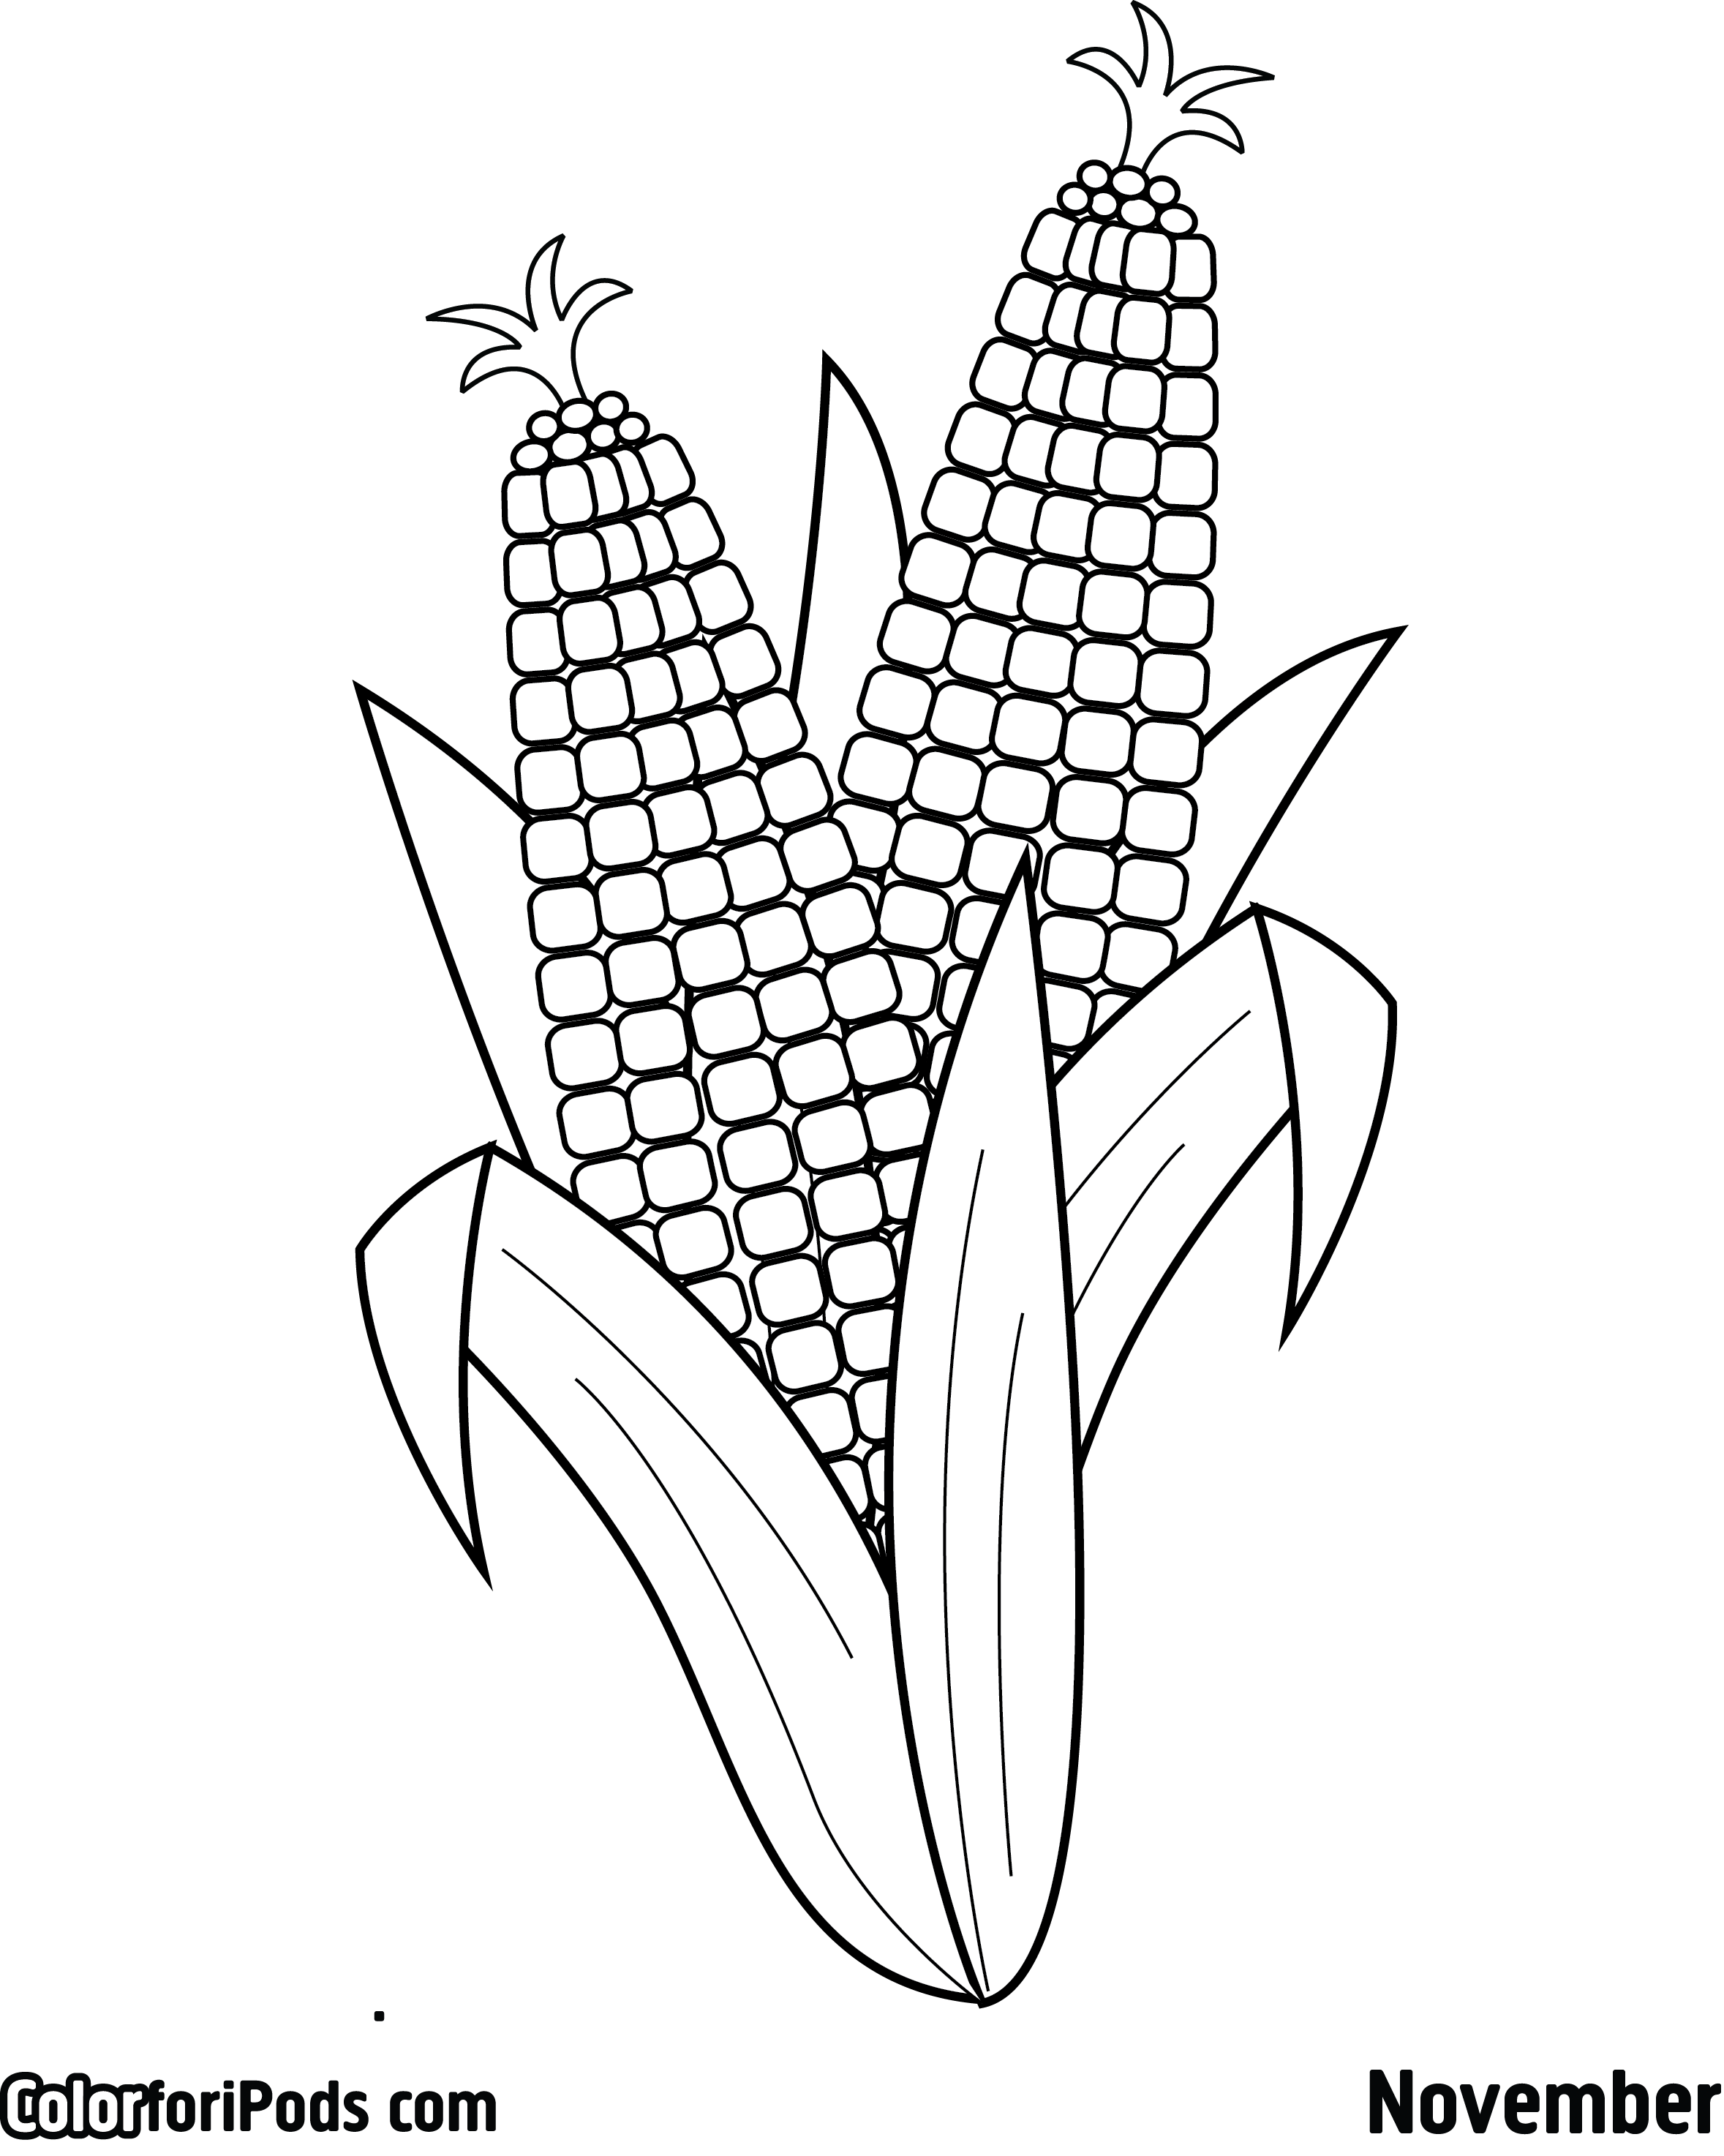 Corn On The Cob Coloring Sheet Sketch Coloring Page